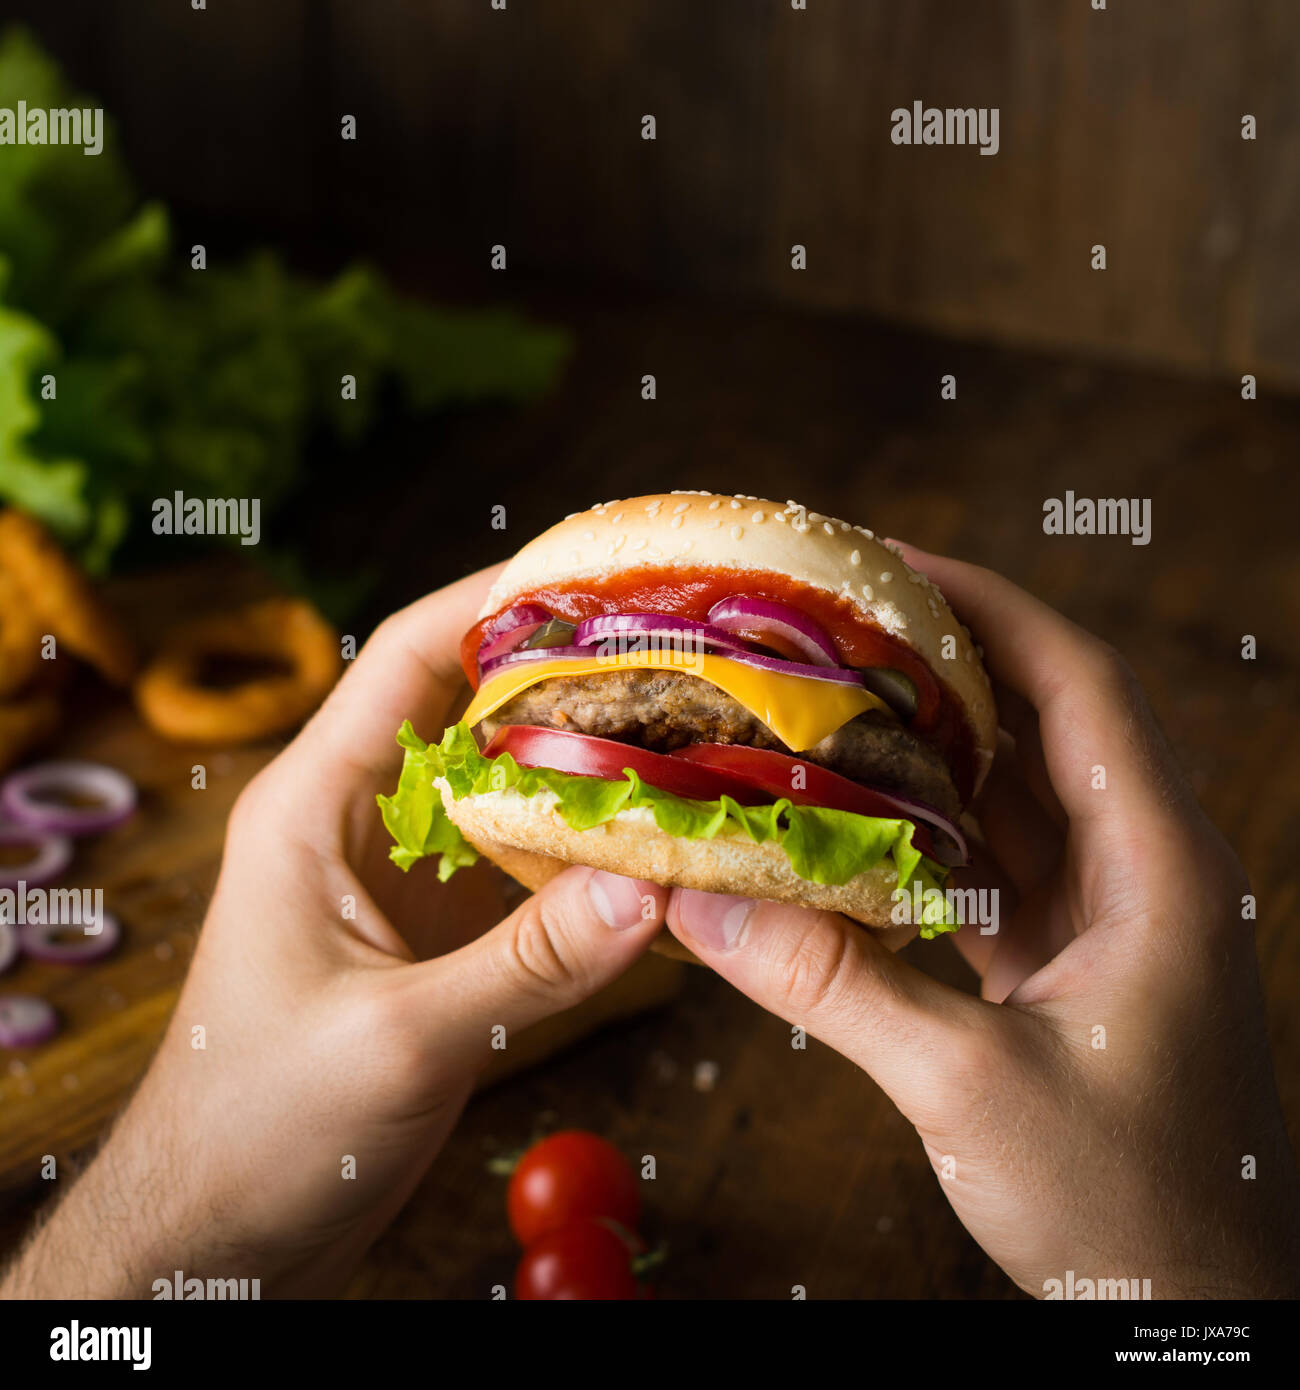 Cheeseburger. Man hands holding burger with cheese, red onion, tomatoes, lettuce green salad and pickles. Square crop. Closeup view, selective focus Stock Photo